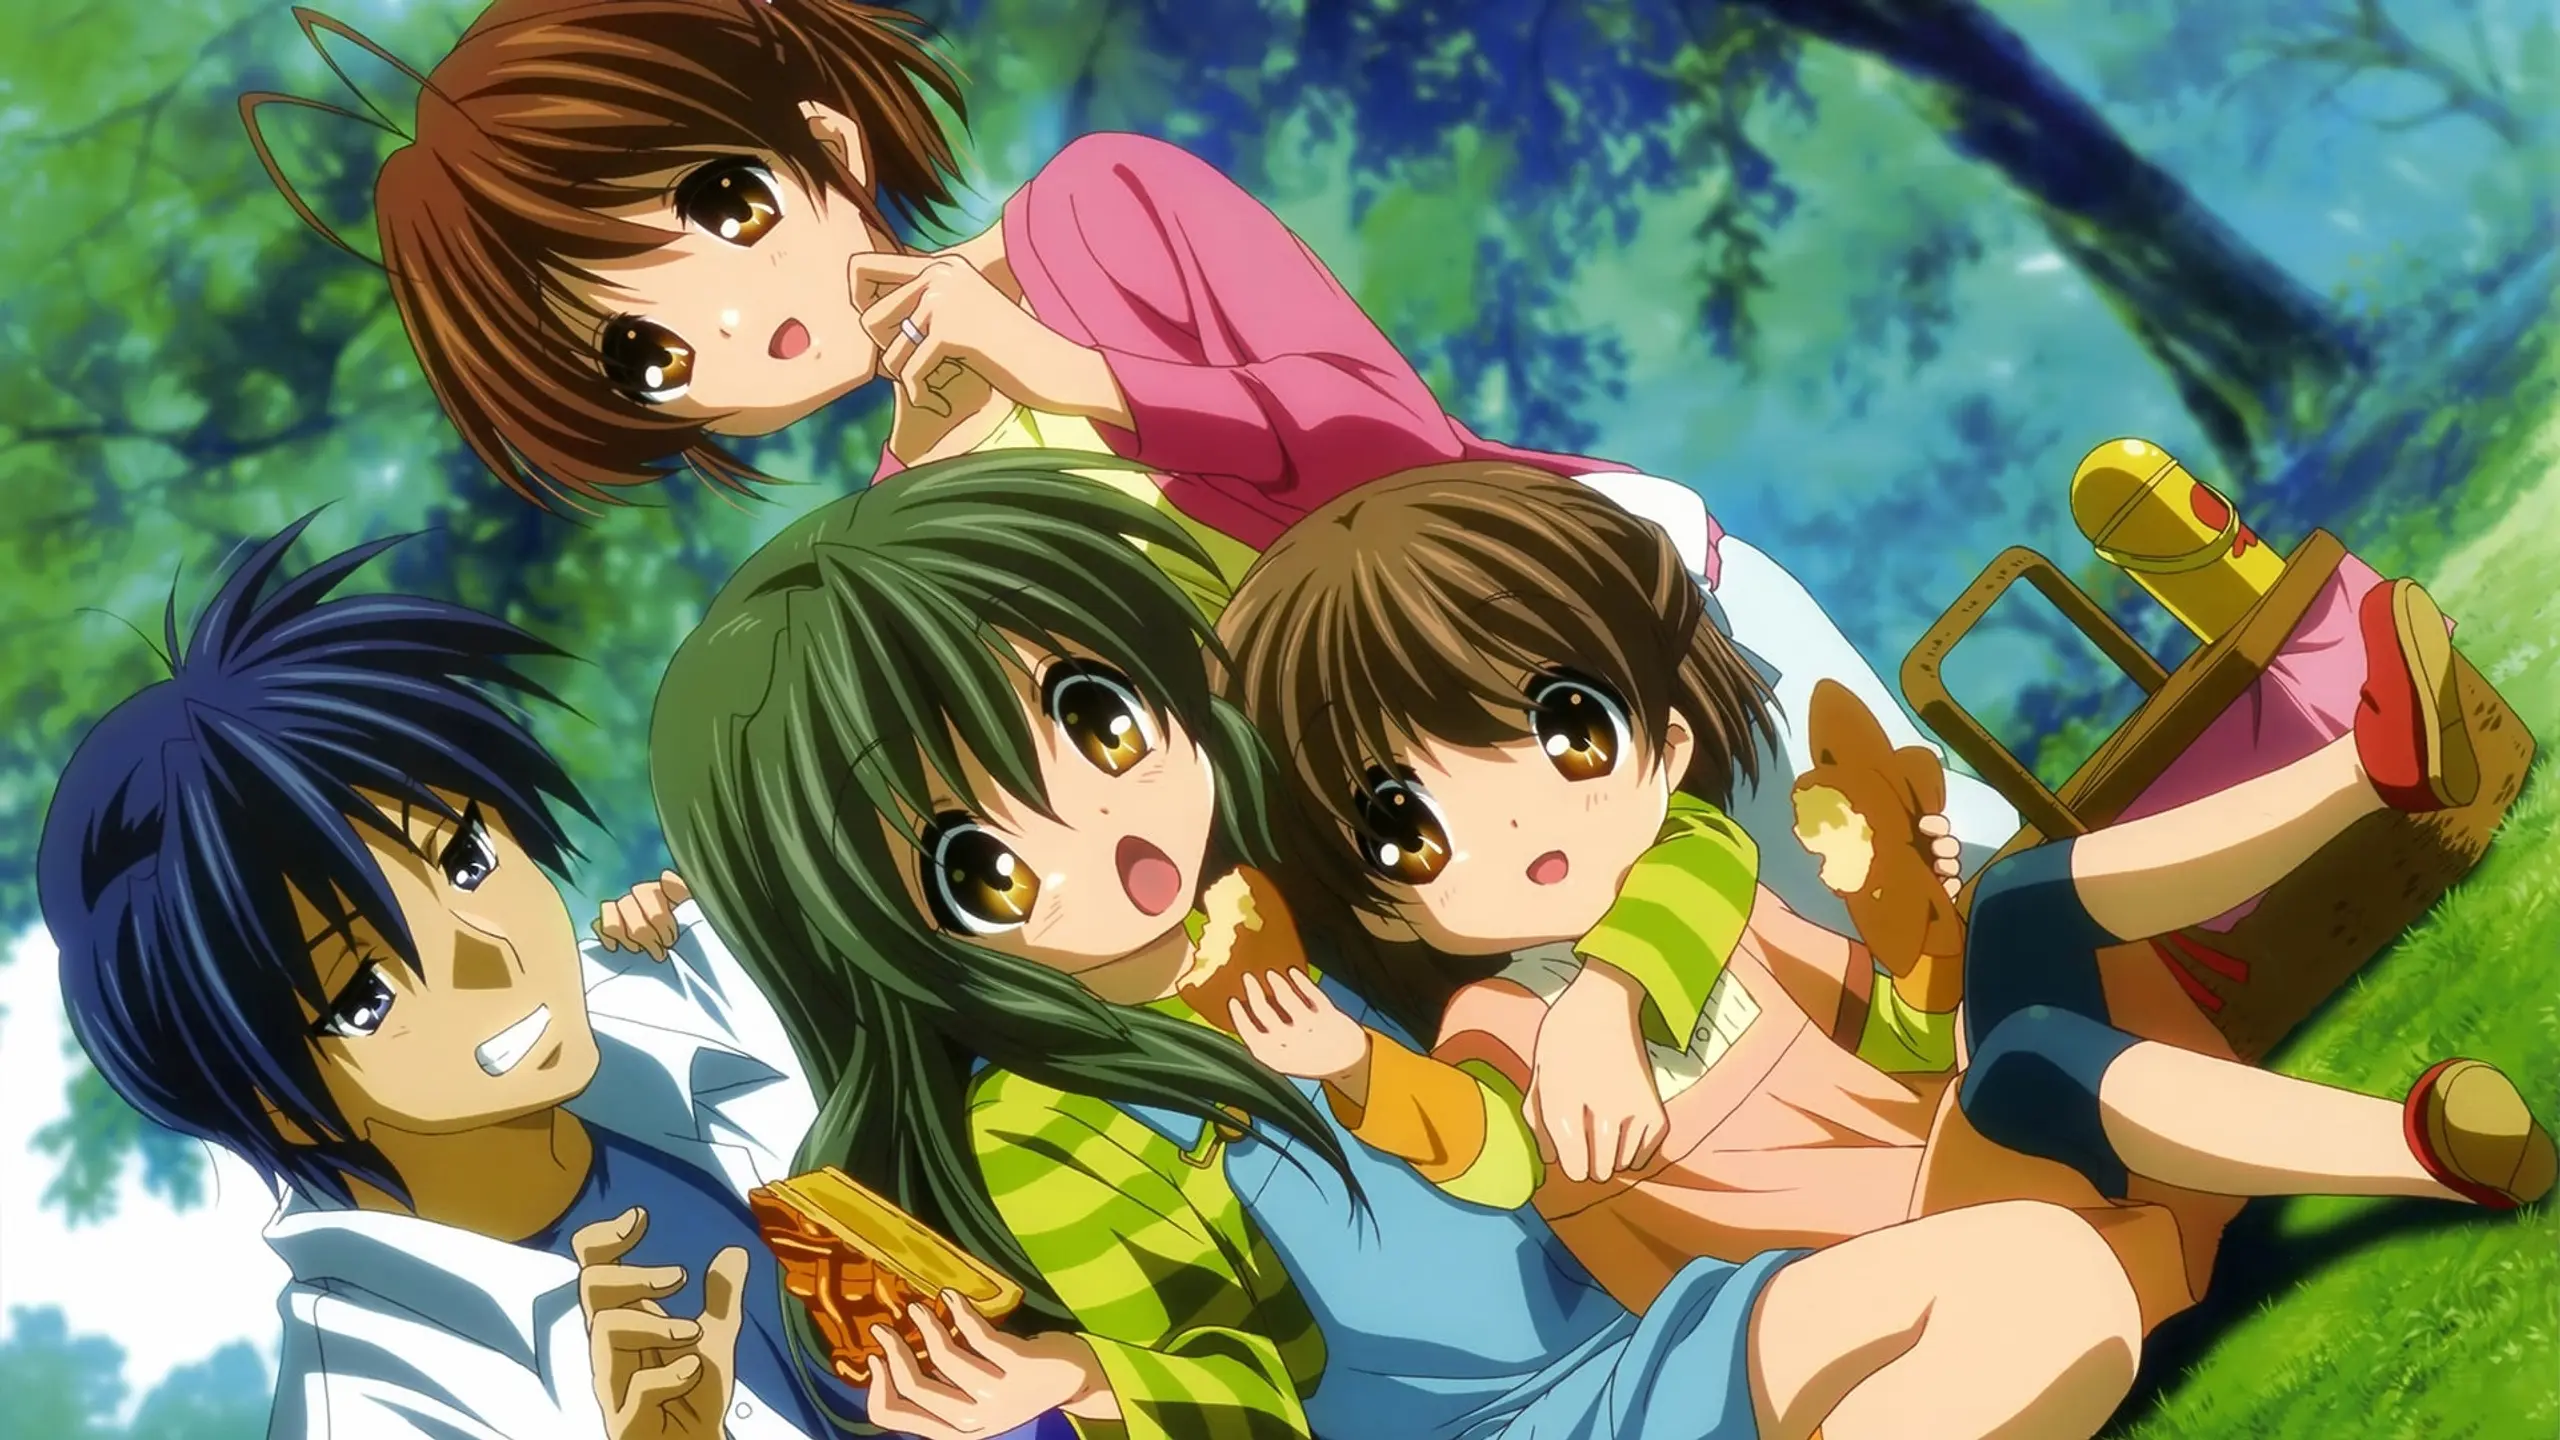 Clannad The Movie